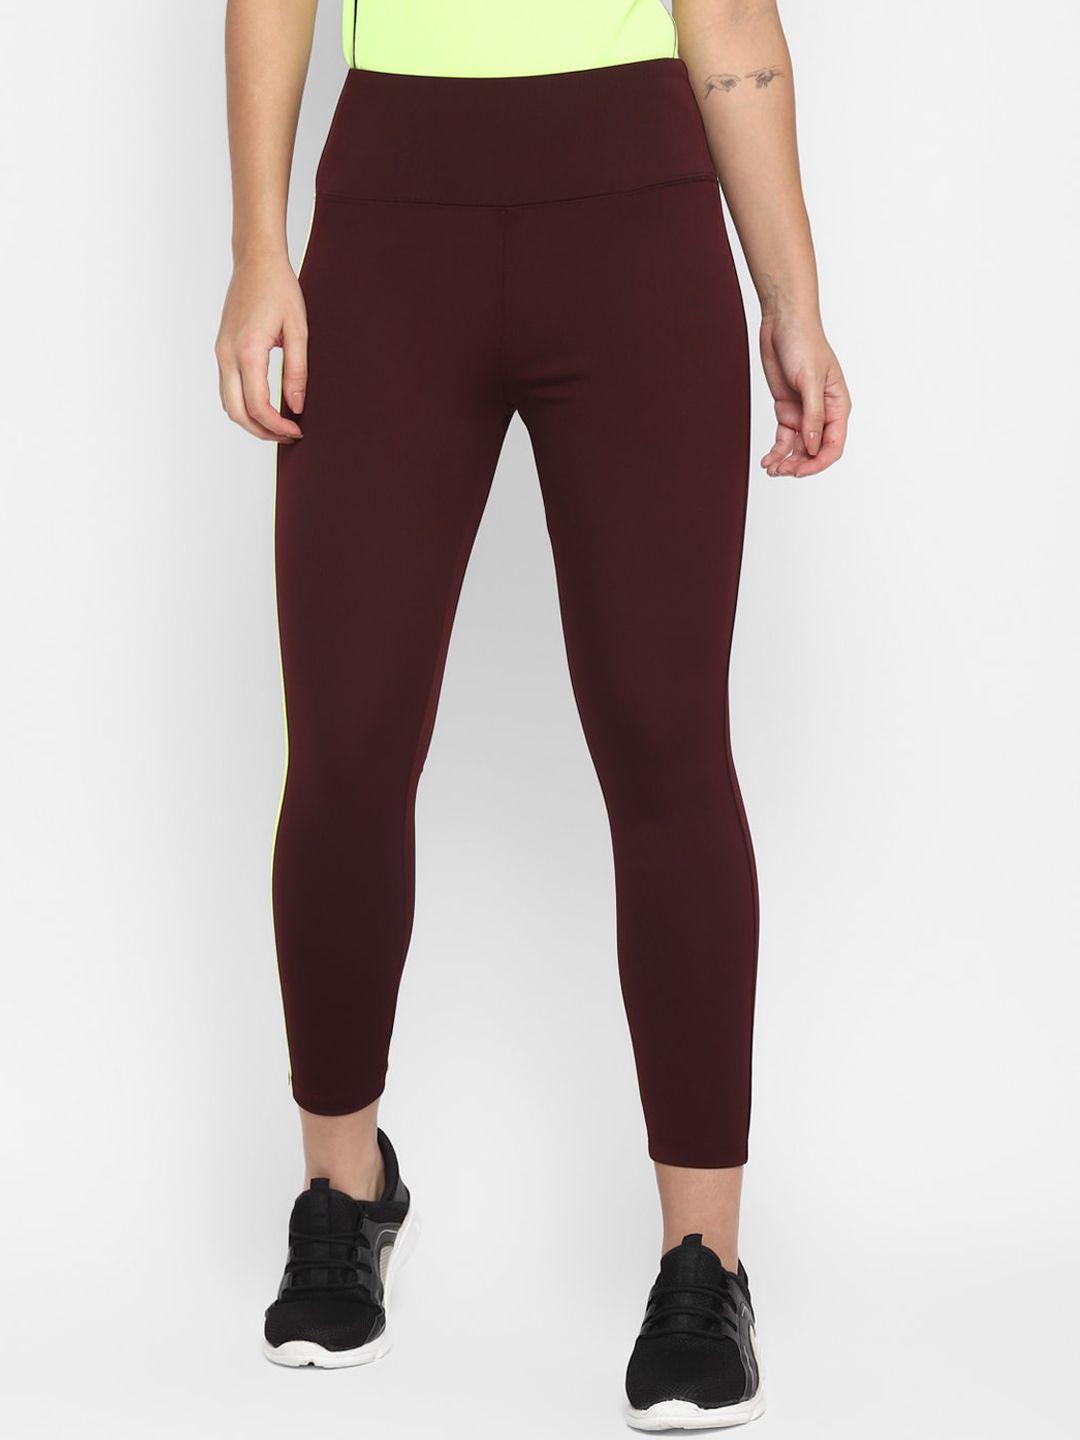 off-limits-women-maroon-solid-antimicrobial-tights